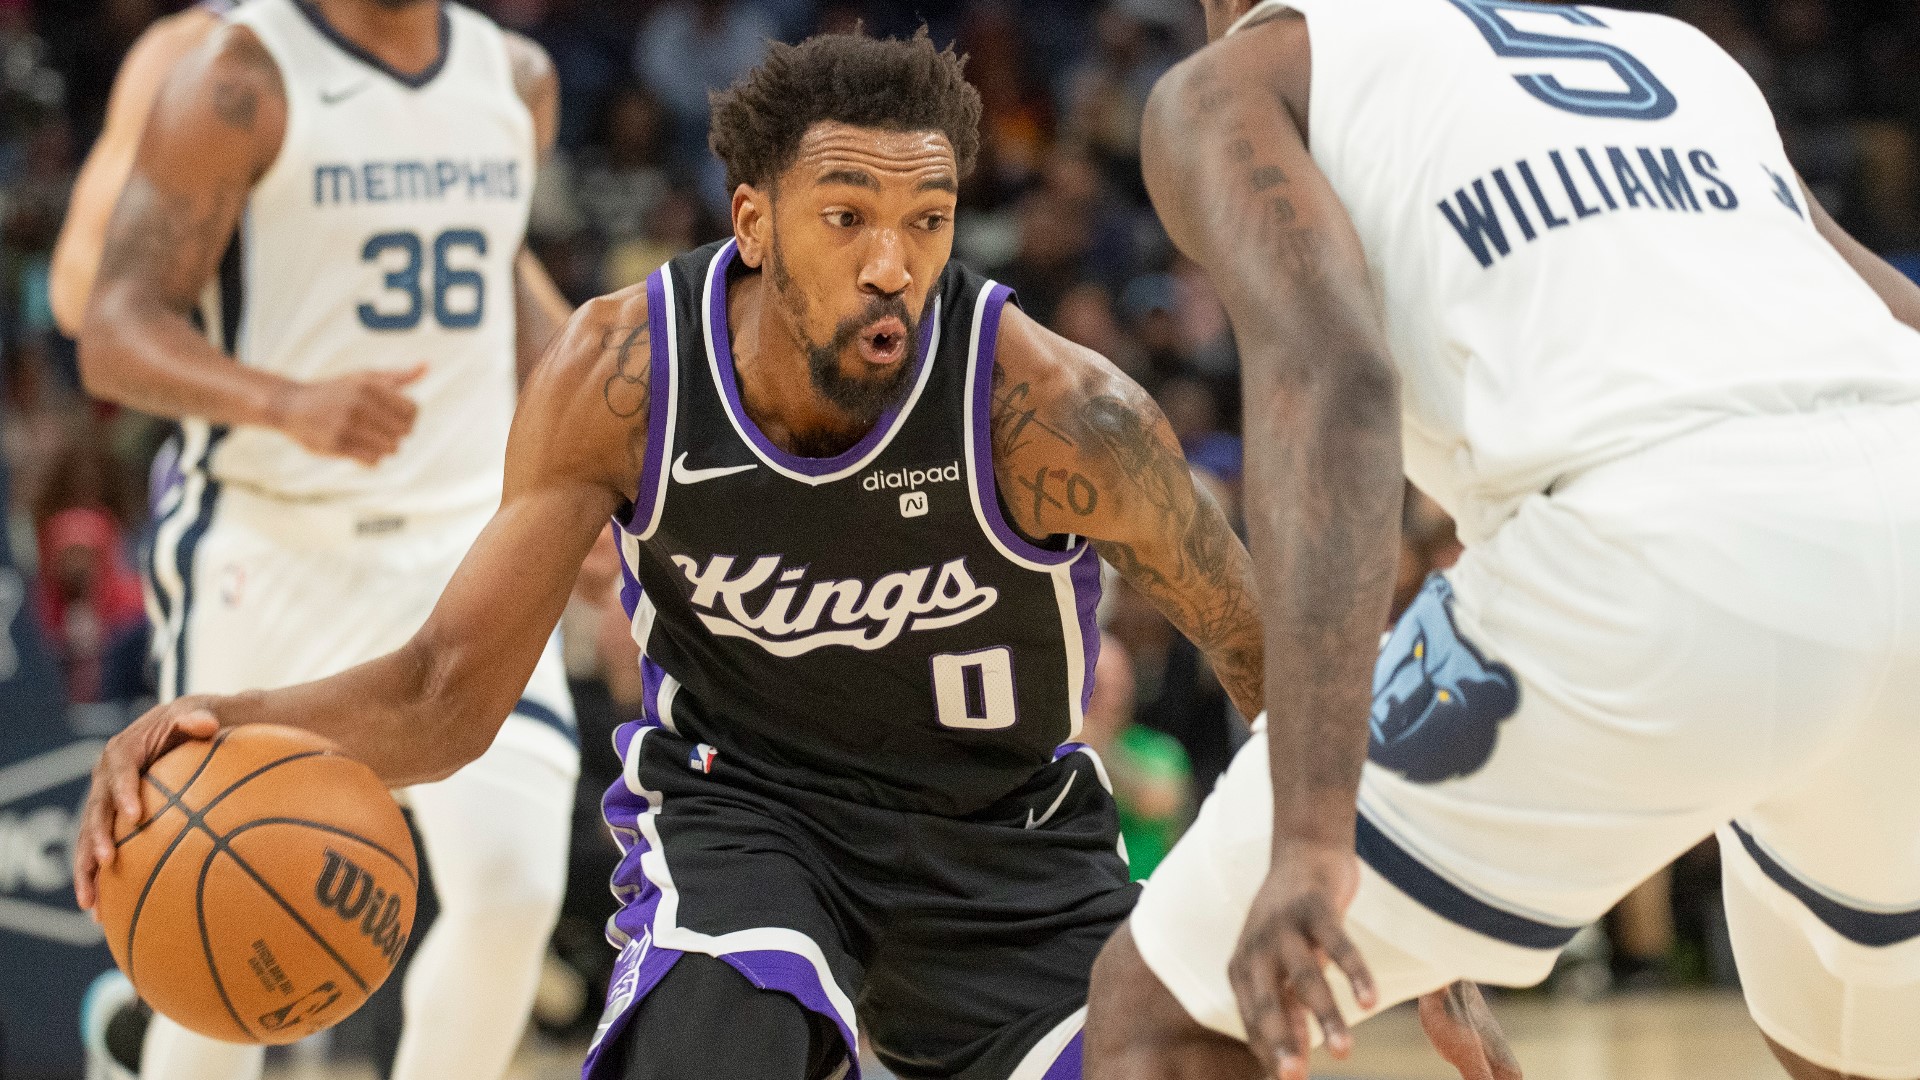 The deal costs the Kings $78 million and lasts four years.